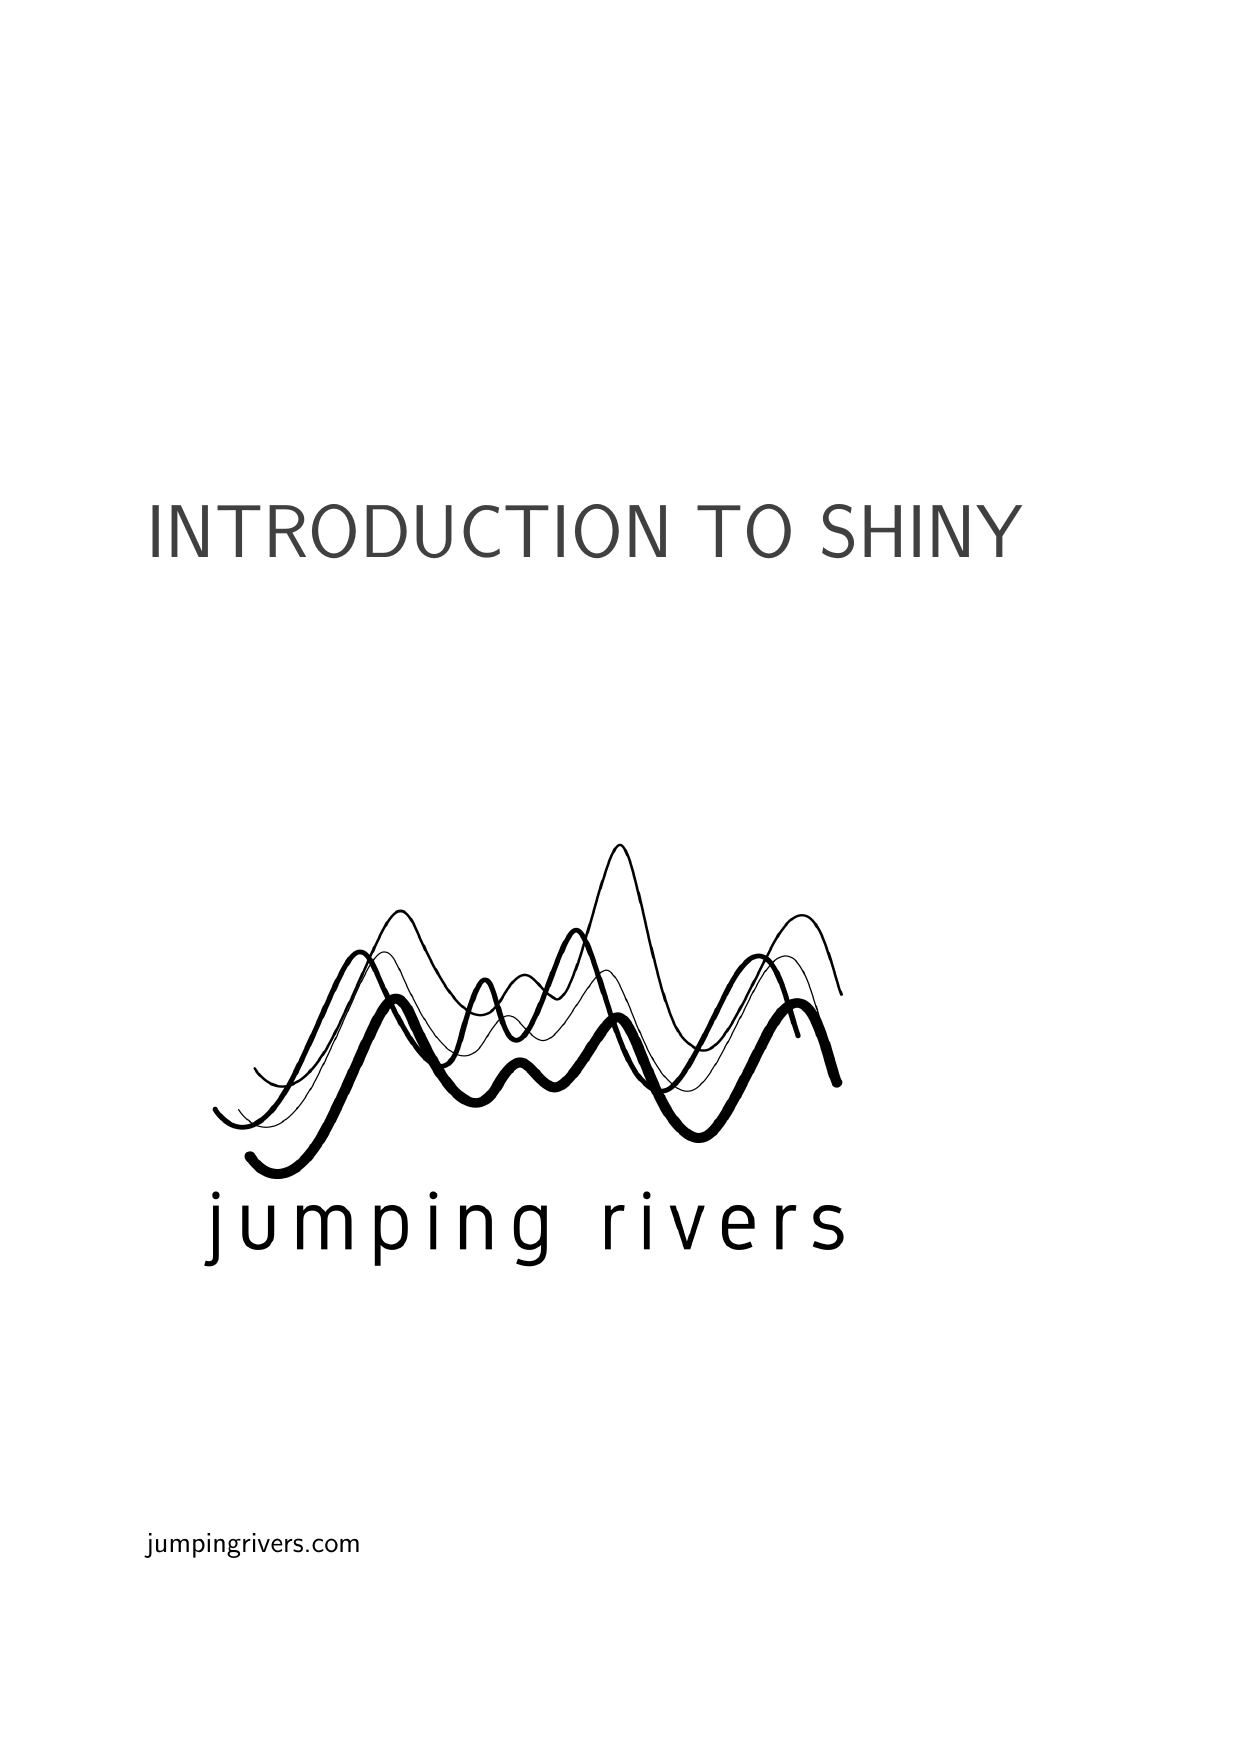 Example course material for 'Introduction to Shiny'